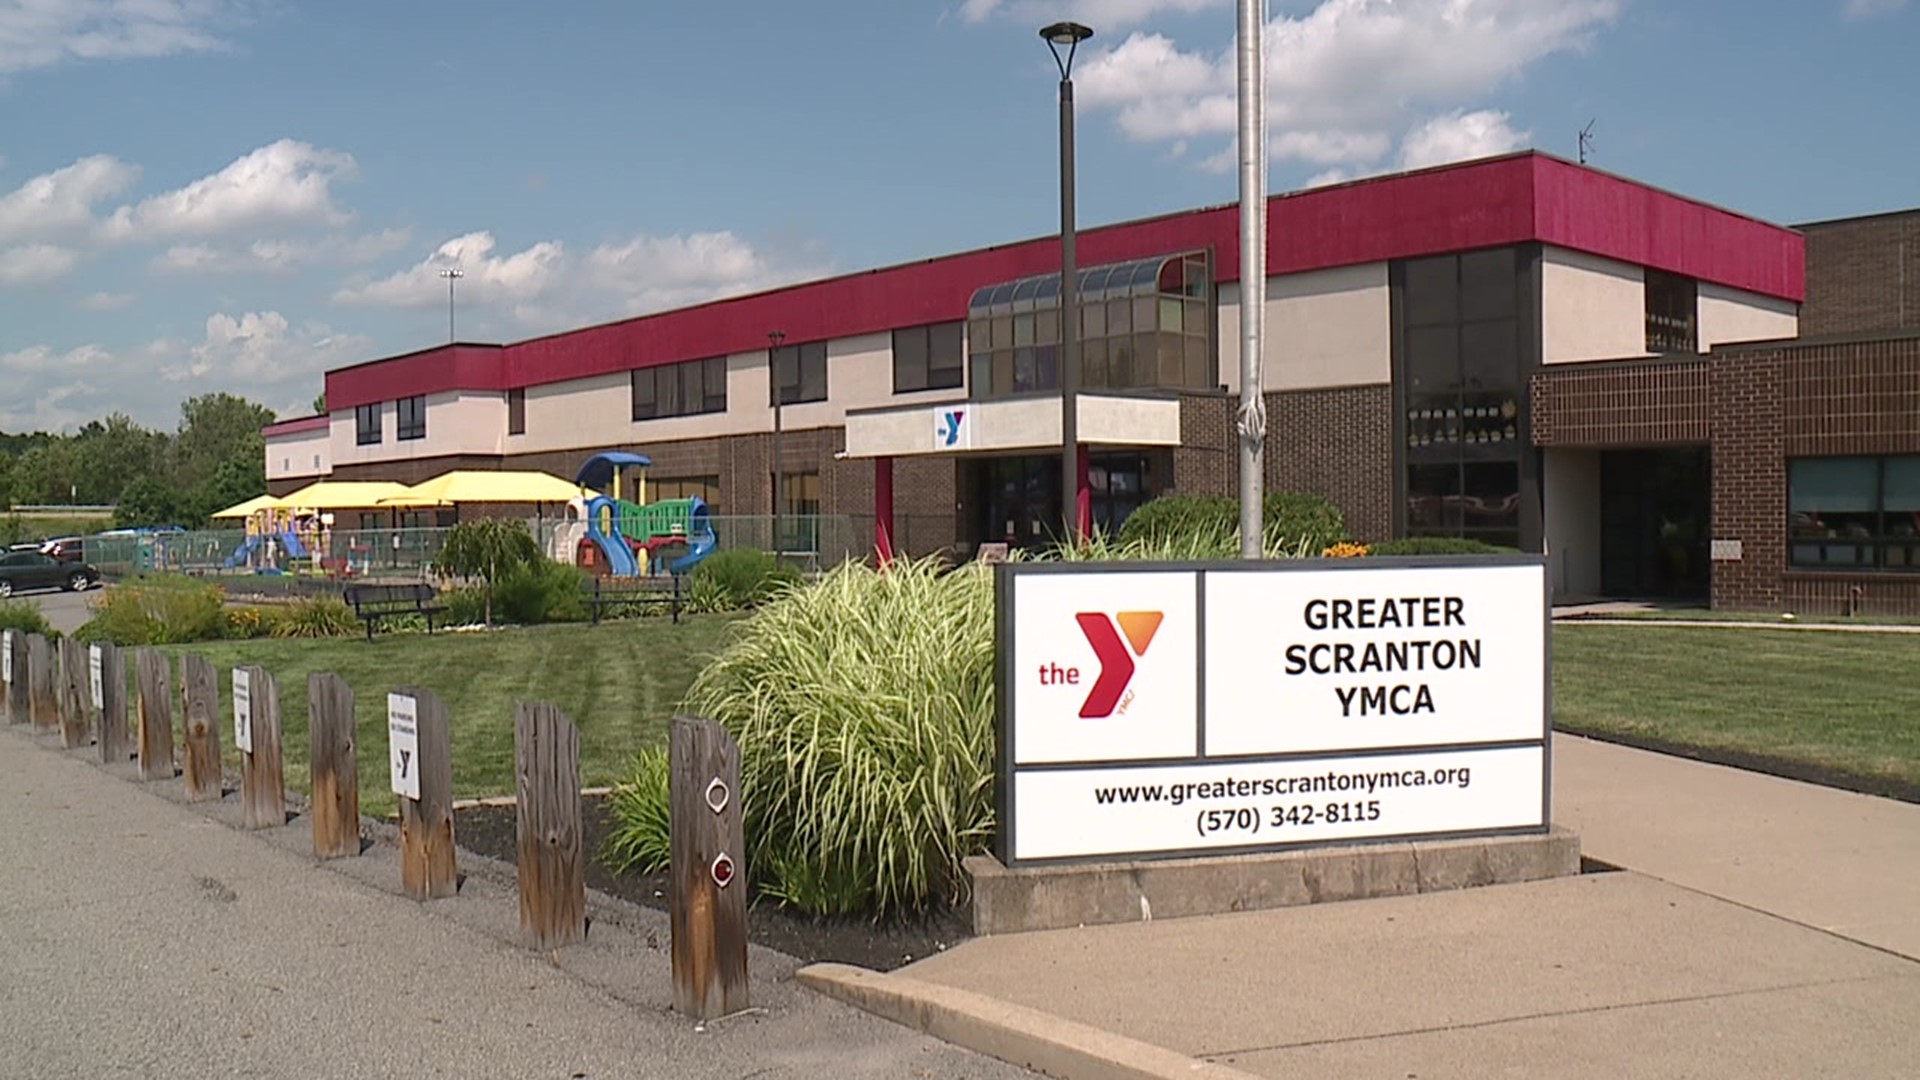 A YMCA in Lackawanna County needs your help to improve its food program for kids and families in need.